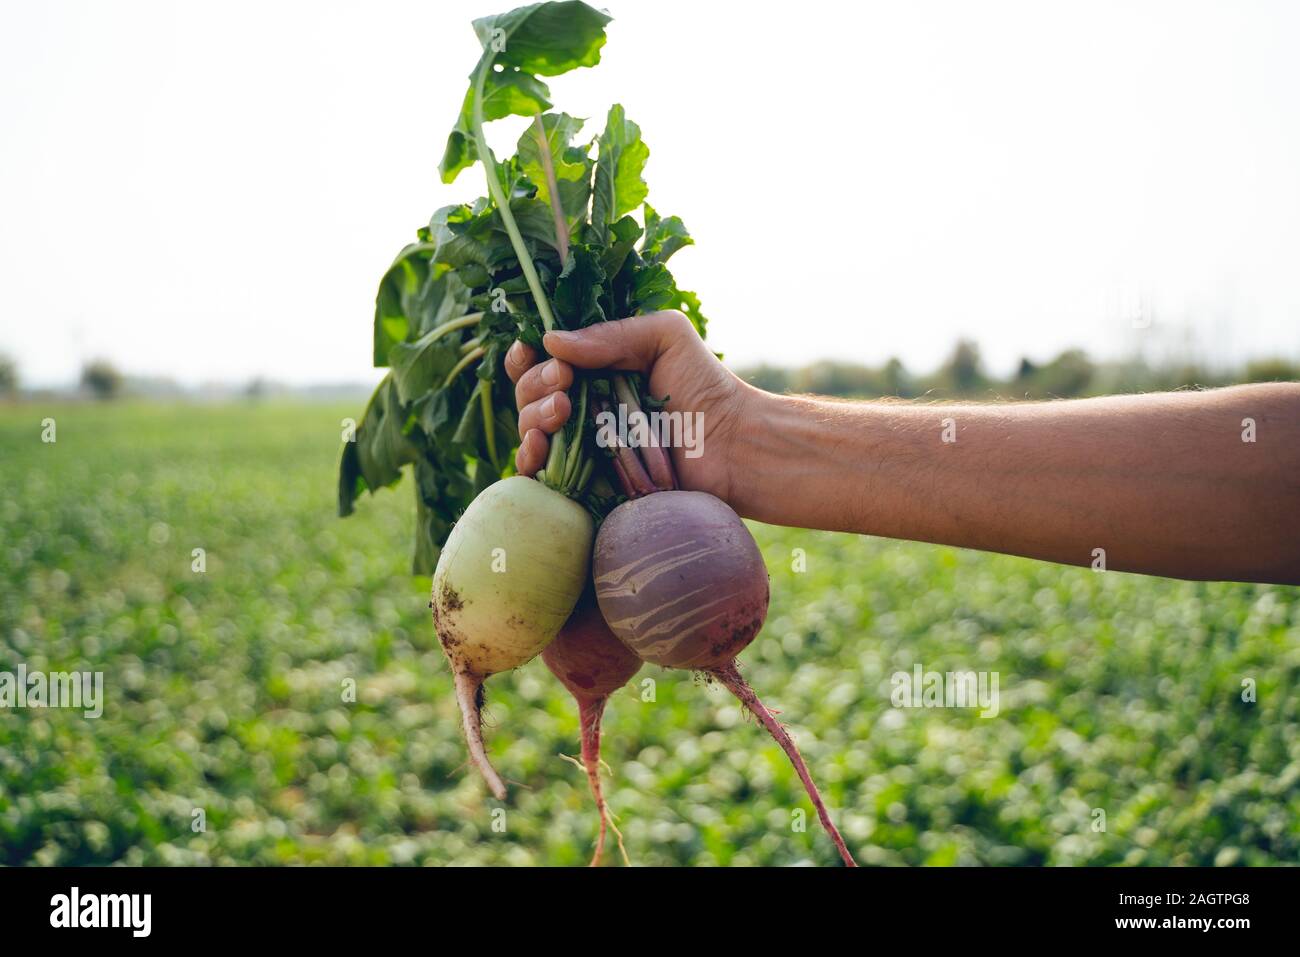 Farmer holding harvested radish, close up of hand with root vegetable Stock Photo